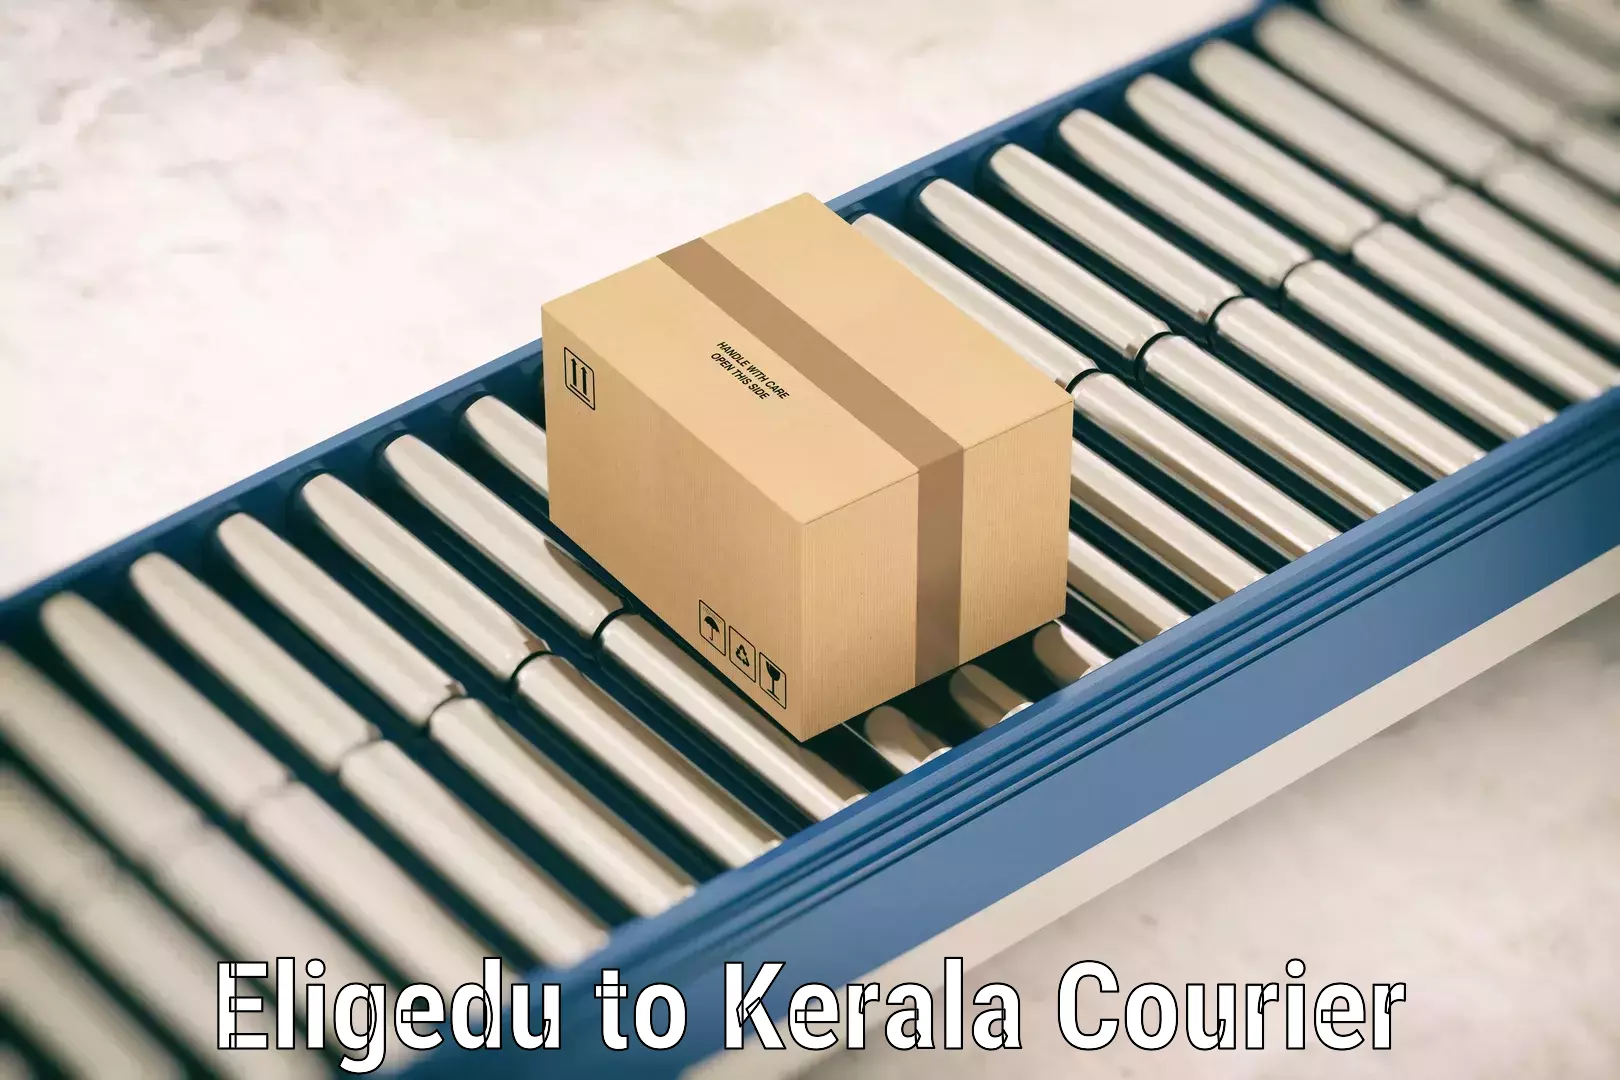 Immediate baggage courier Eligedu to Kerala